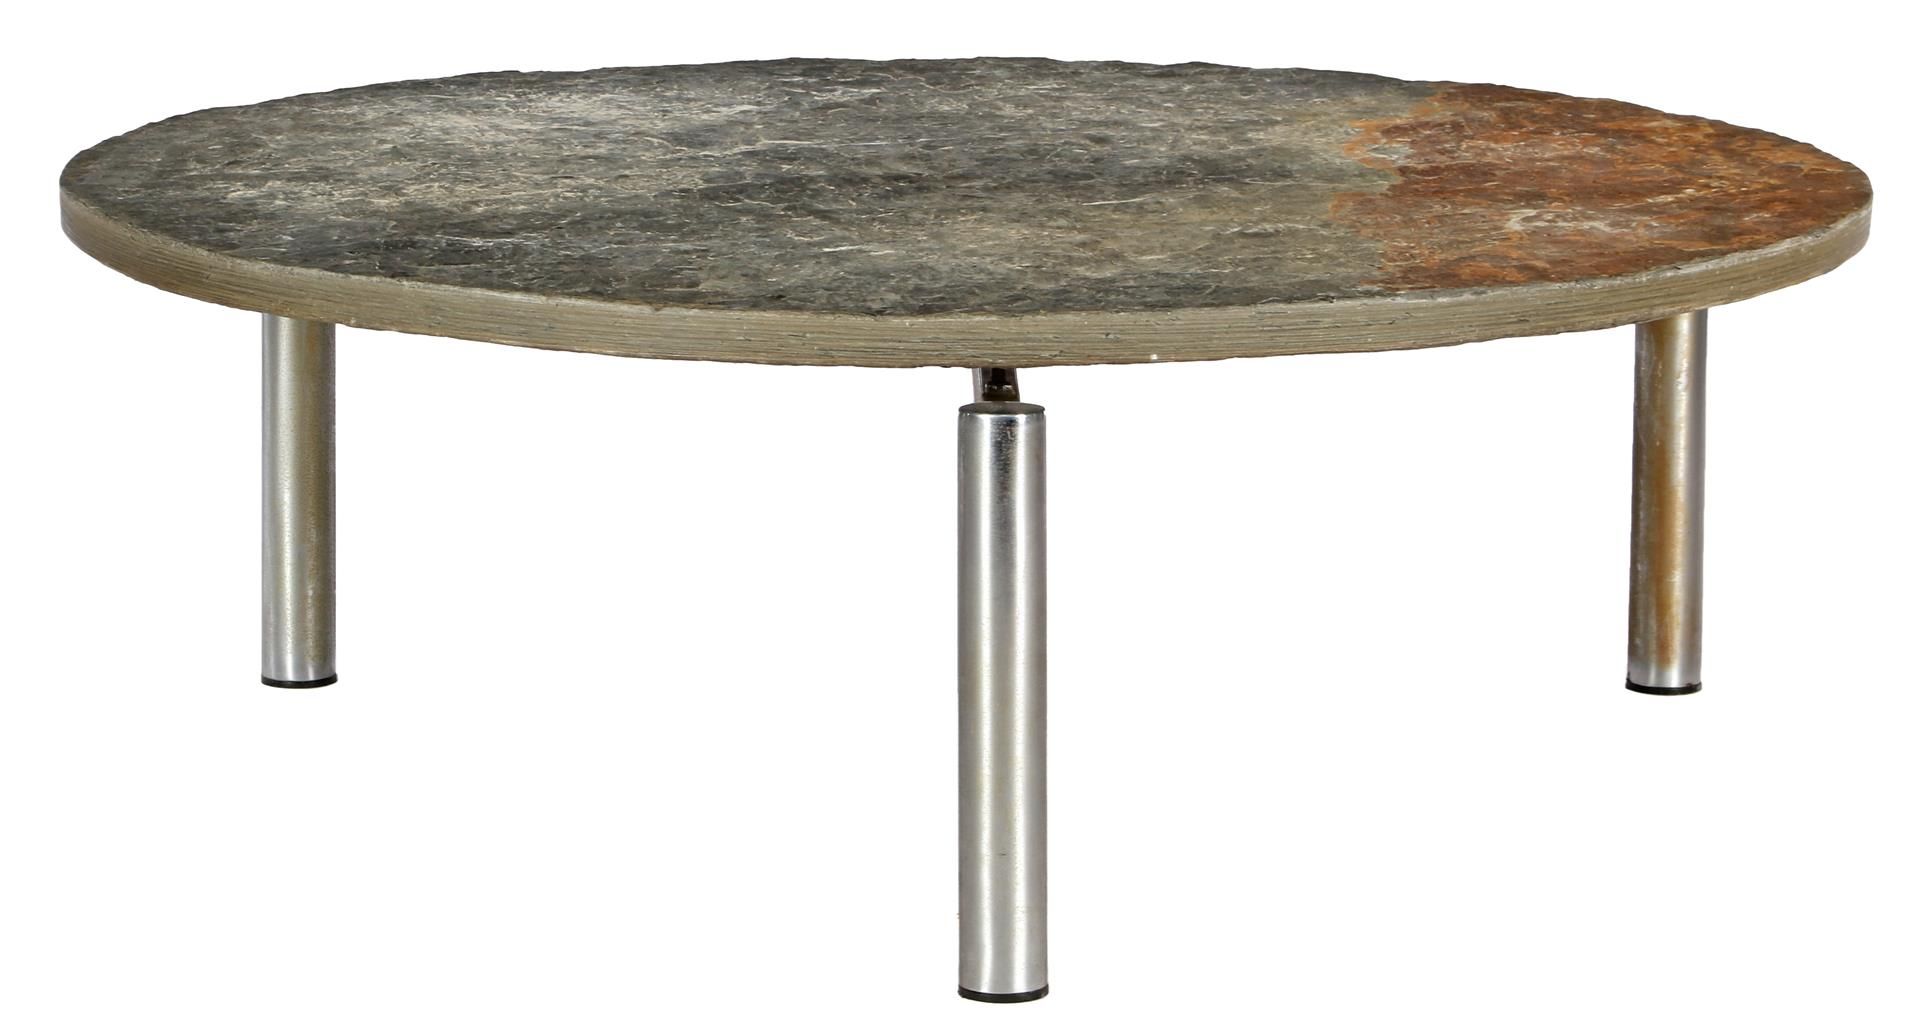 Coffee table with natural stone top 